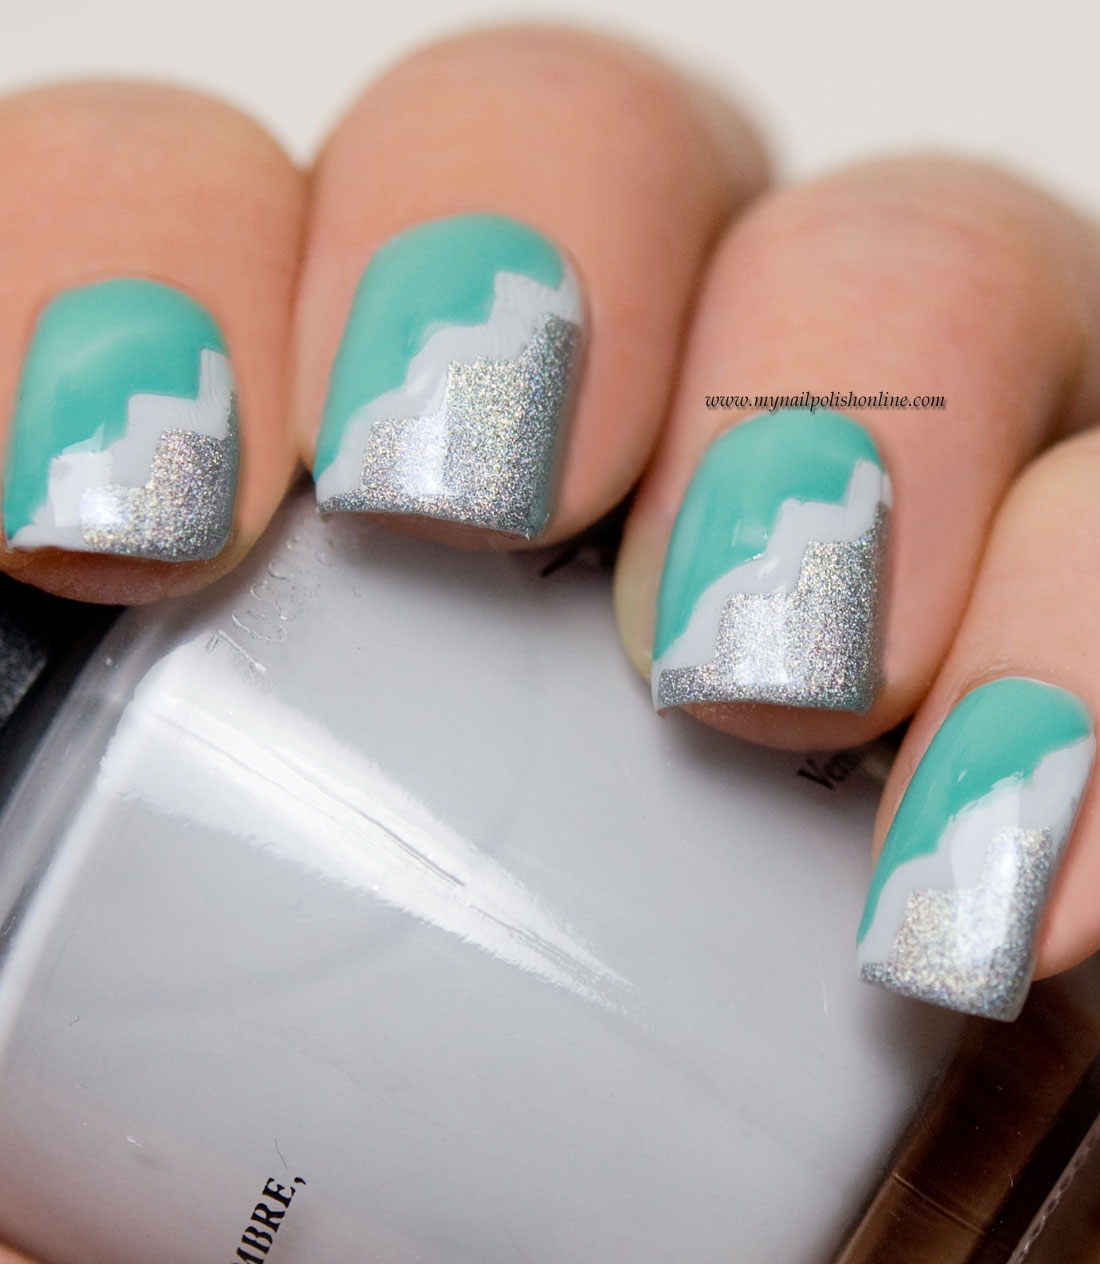 Nail Art with tape manicure - My Nail Polish Online